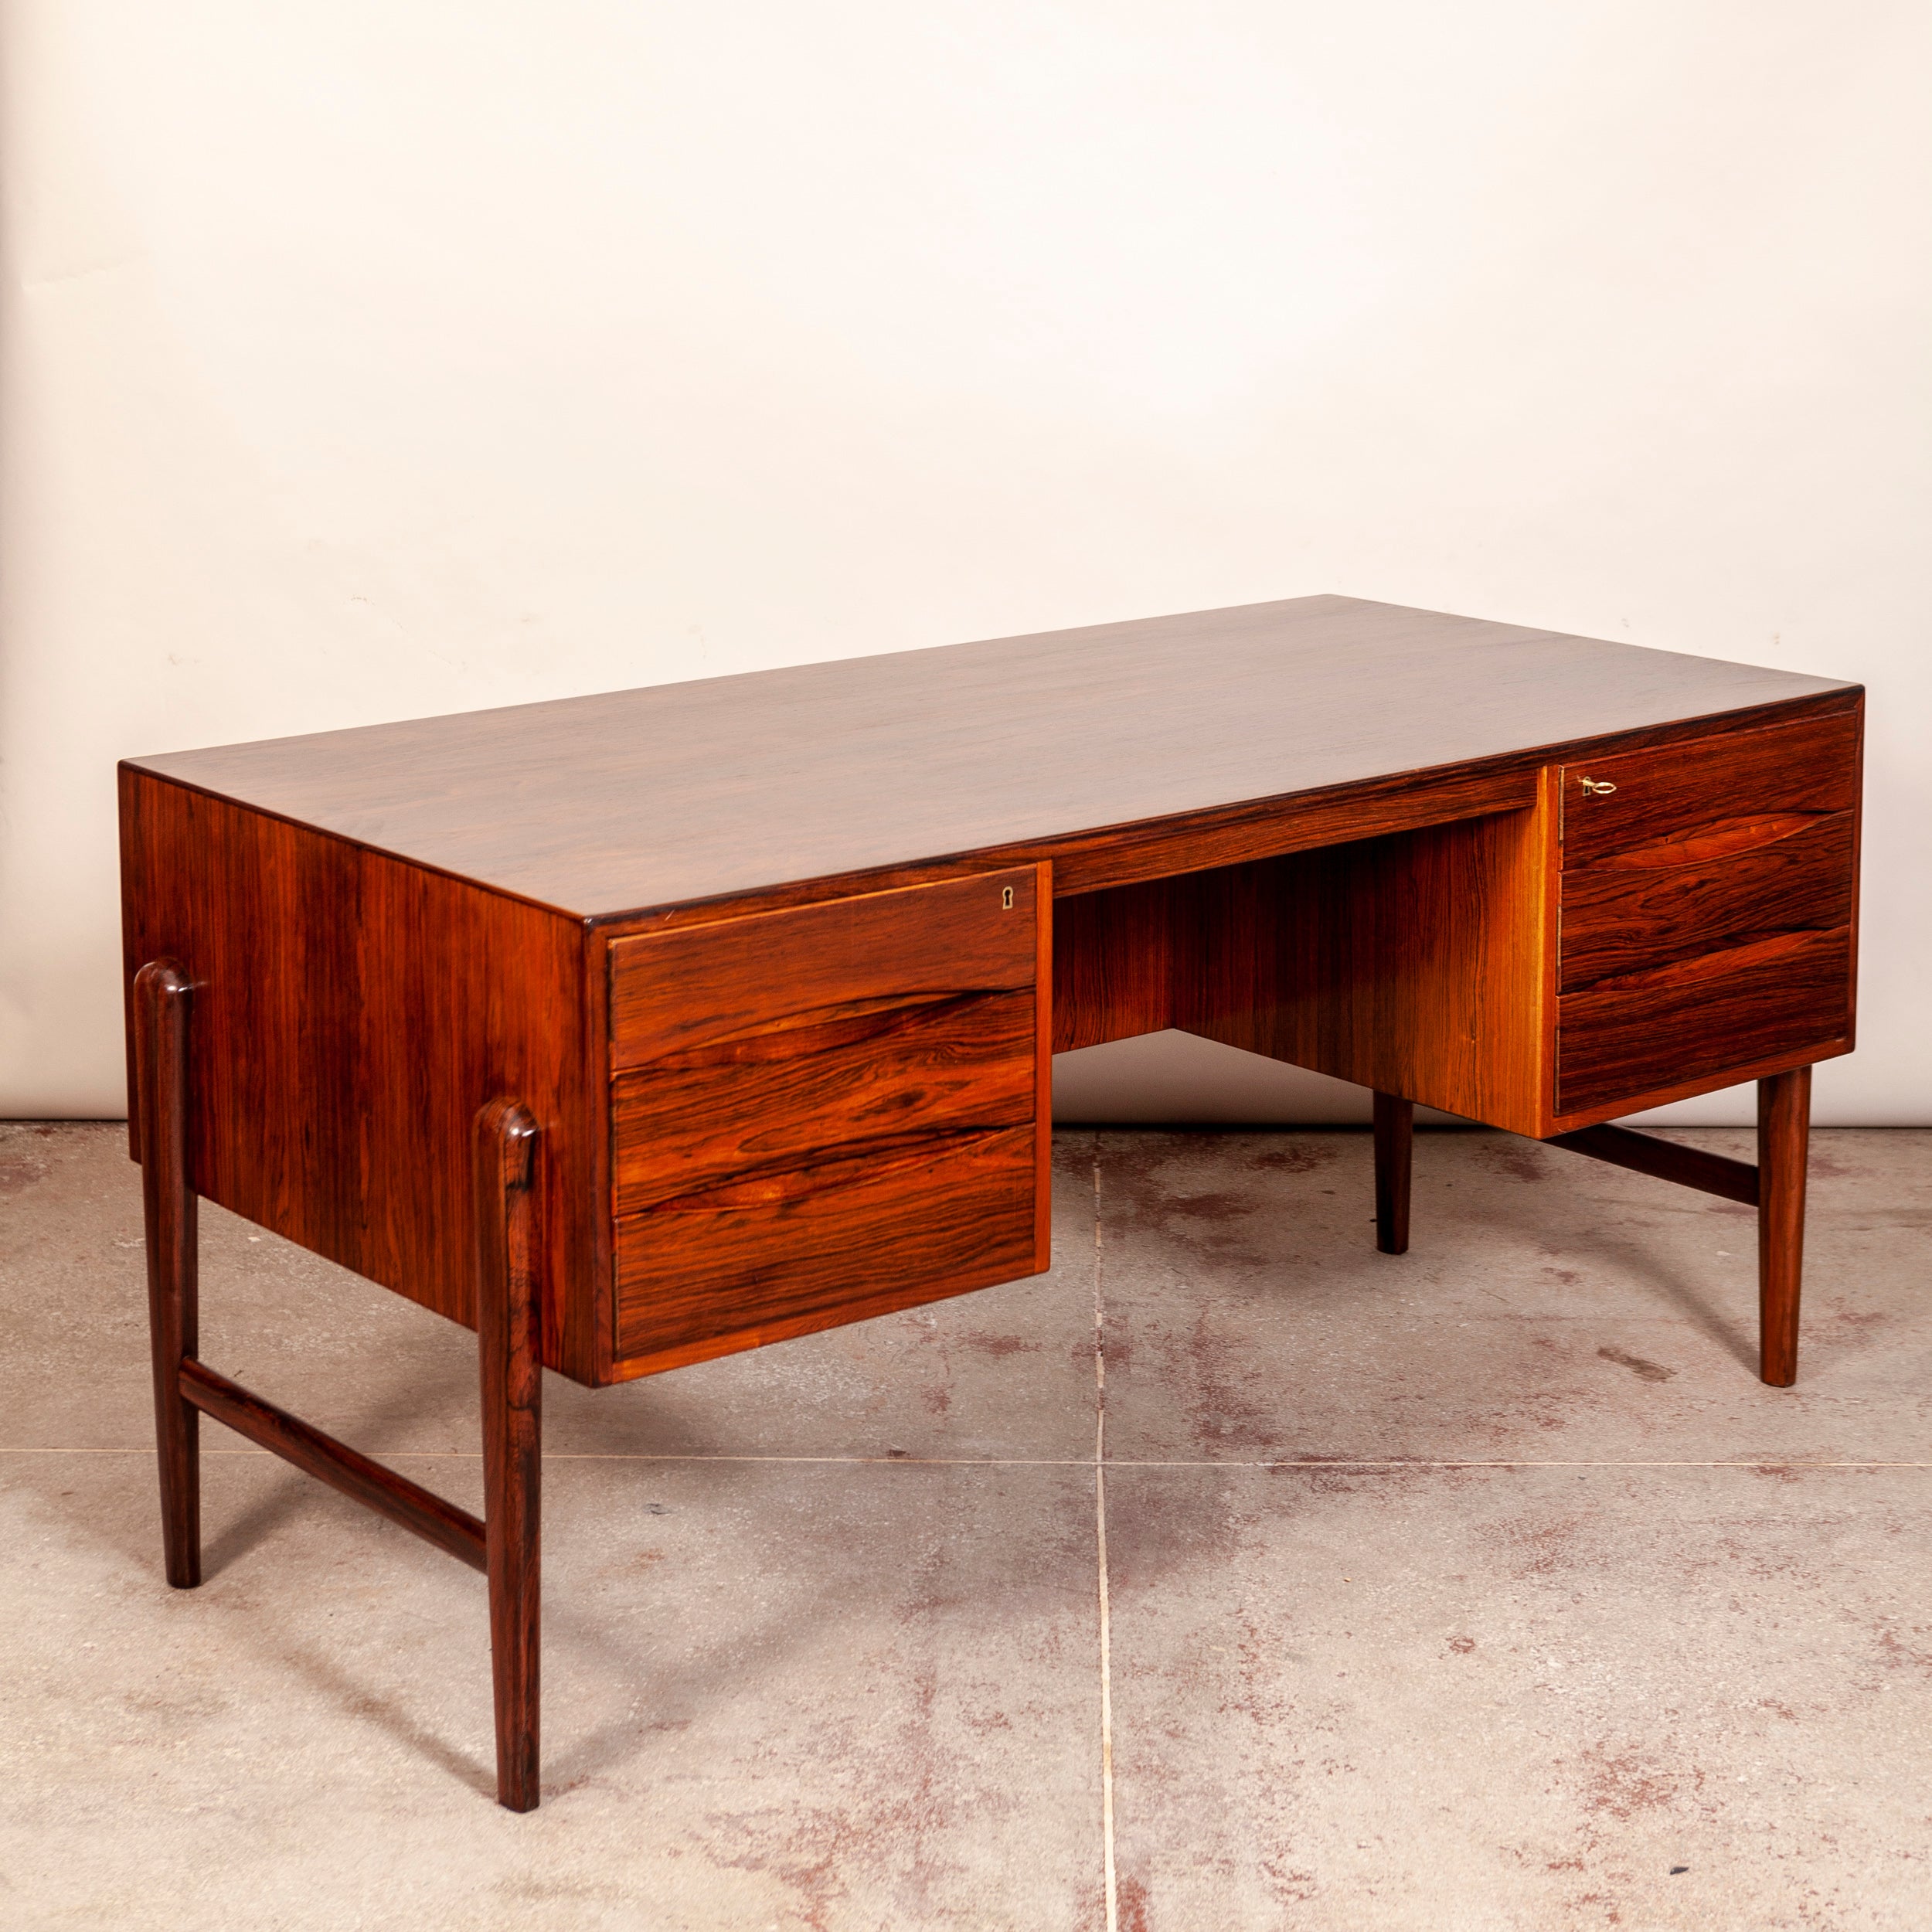 This beautifully designed & proportioned desk is constructed in premium Brazilian Rosewood which features beautiful grain all around.

The drawer fronts display perfect form and function while the sides are attached to the insides of the drawer